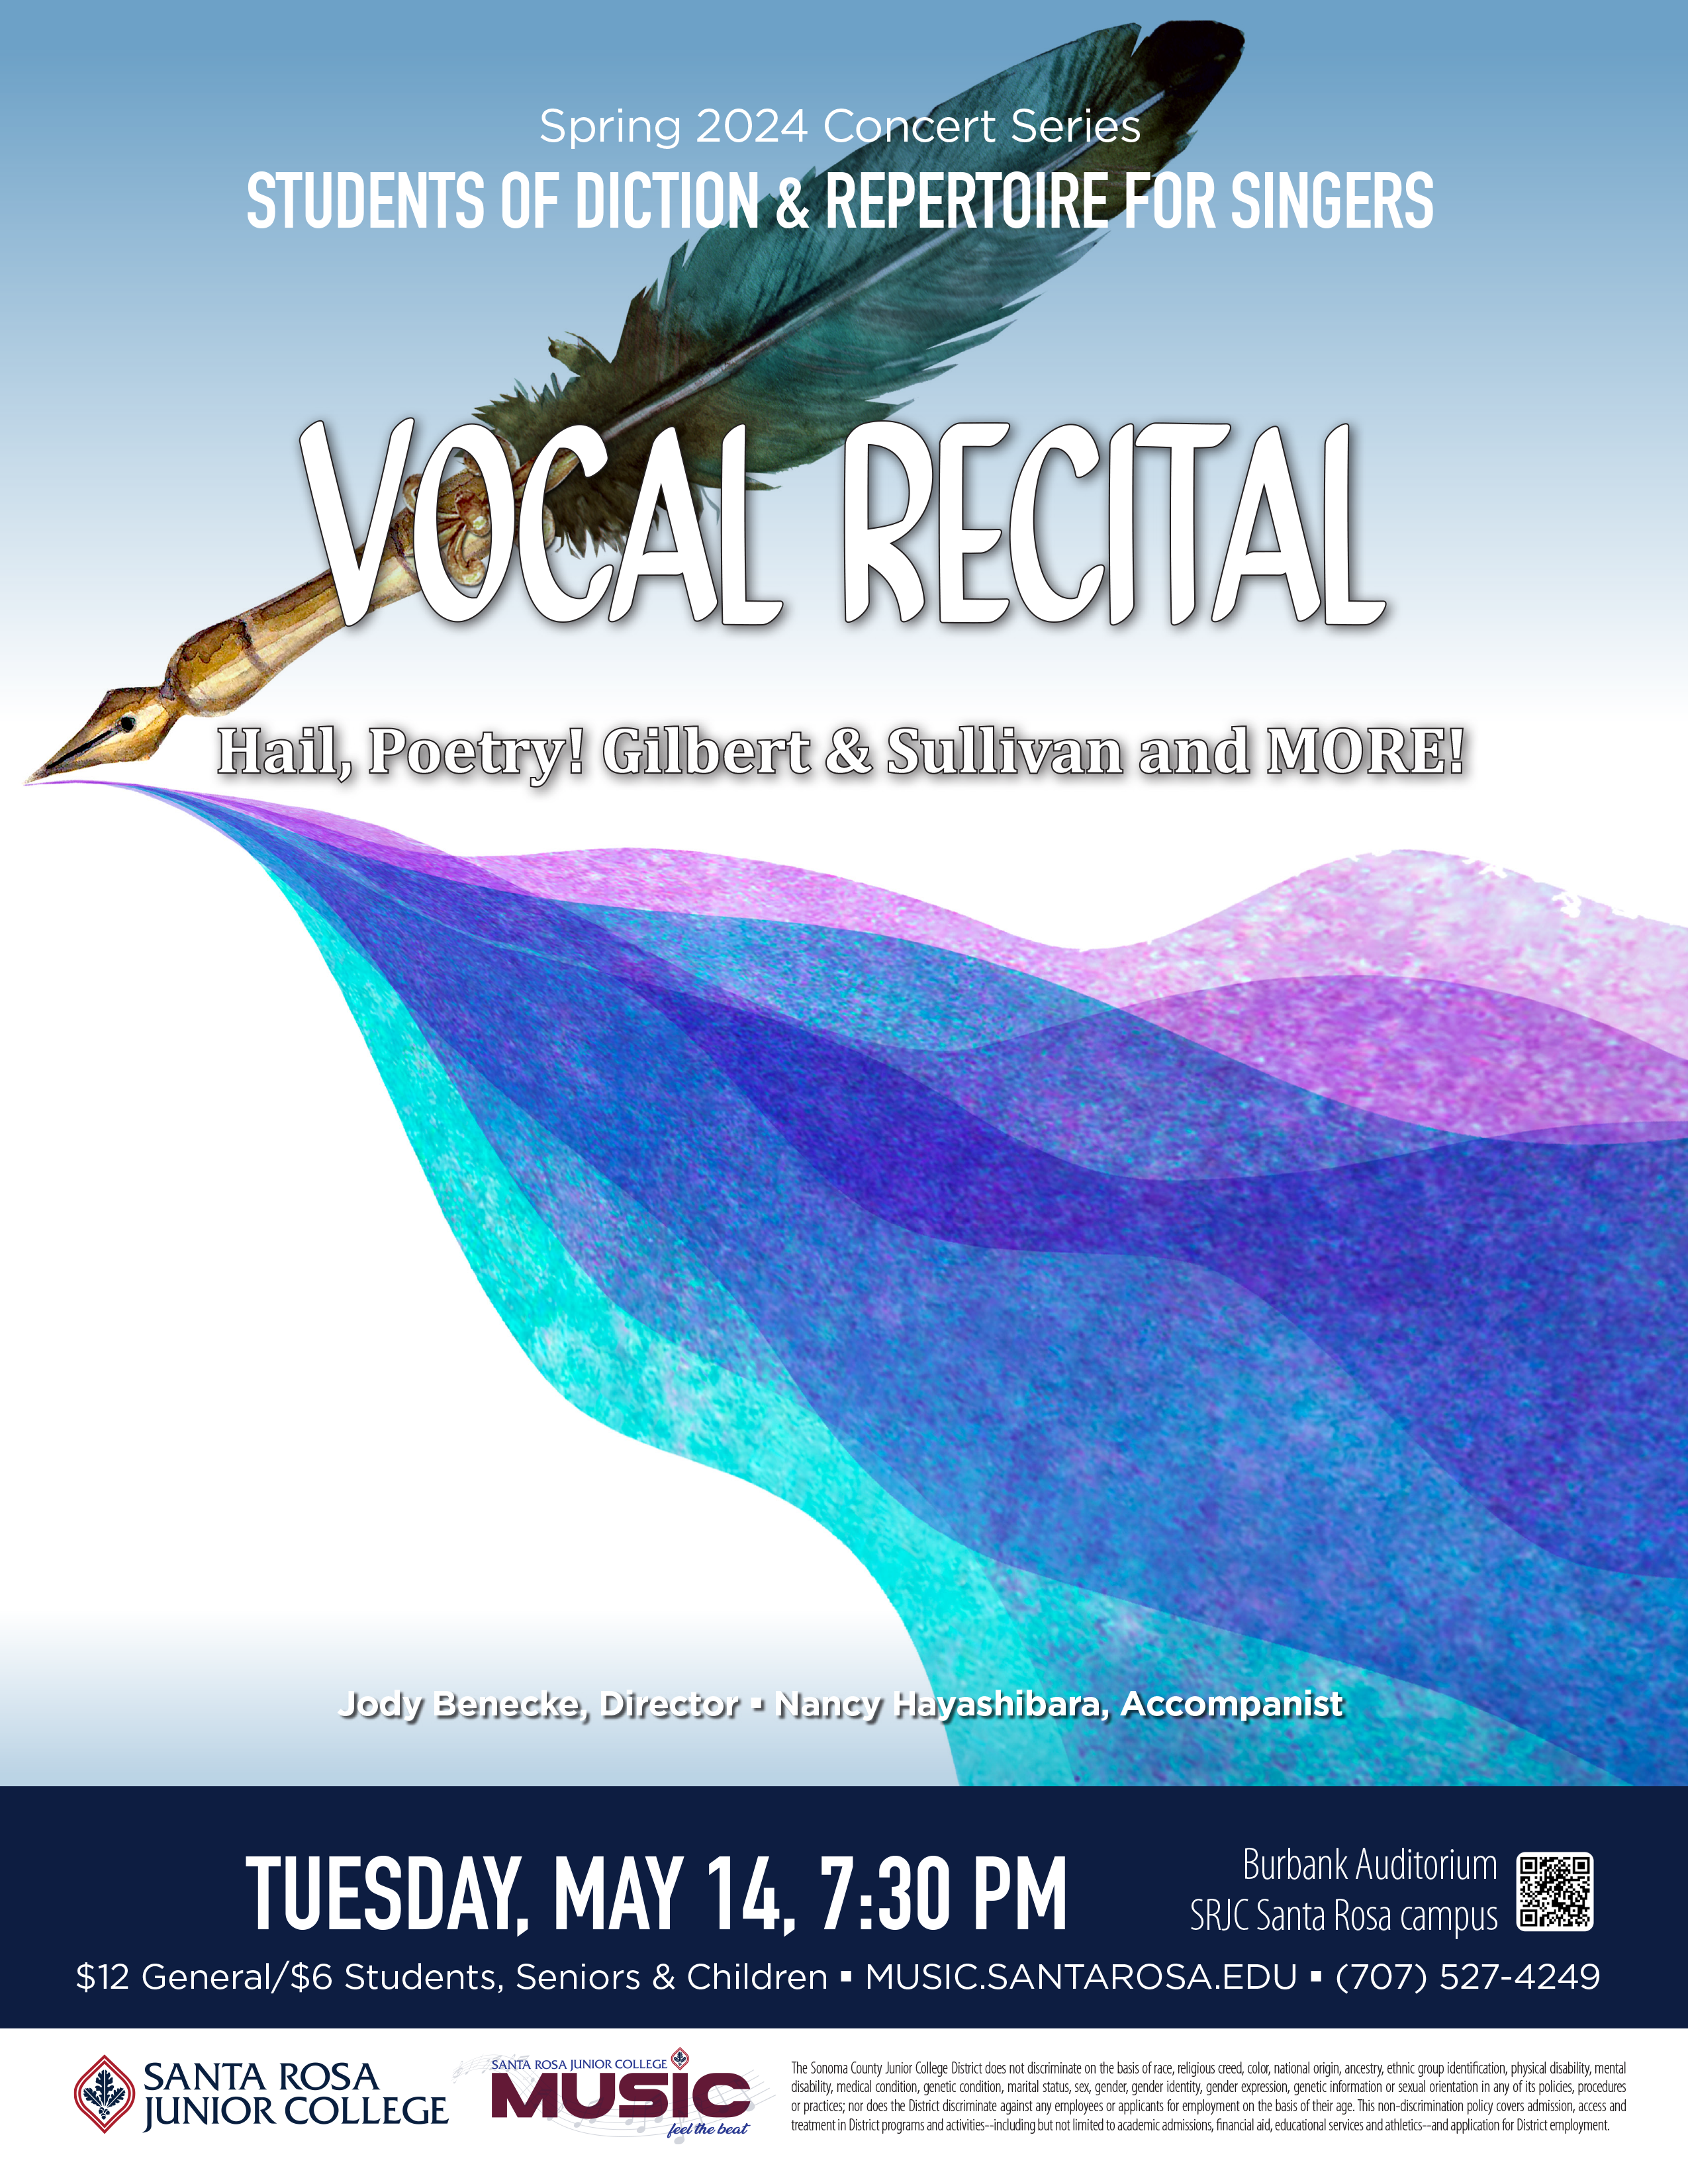 “Hail, Poetry!” on May 14th: Students of the SRJC Diction & Repertoire for Singers class present “Hail, Poetry!” a recital of songs in English ranging from the high-minded art songs of Britten and Copland, to the hilarious operetta of Gilbert & Sullivan, Tuesday, May 14, 2024 at 7:30pm.  Jody Benecke, director and Nancy Hayashibara, piano.